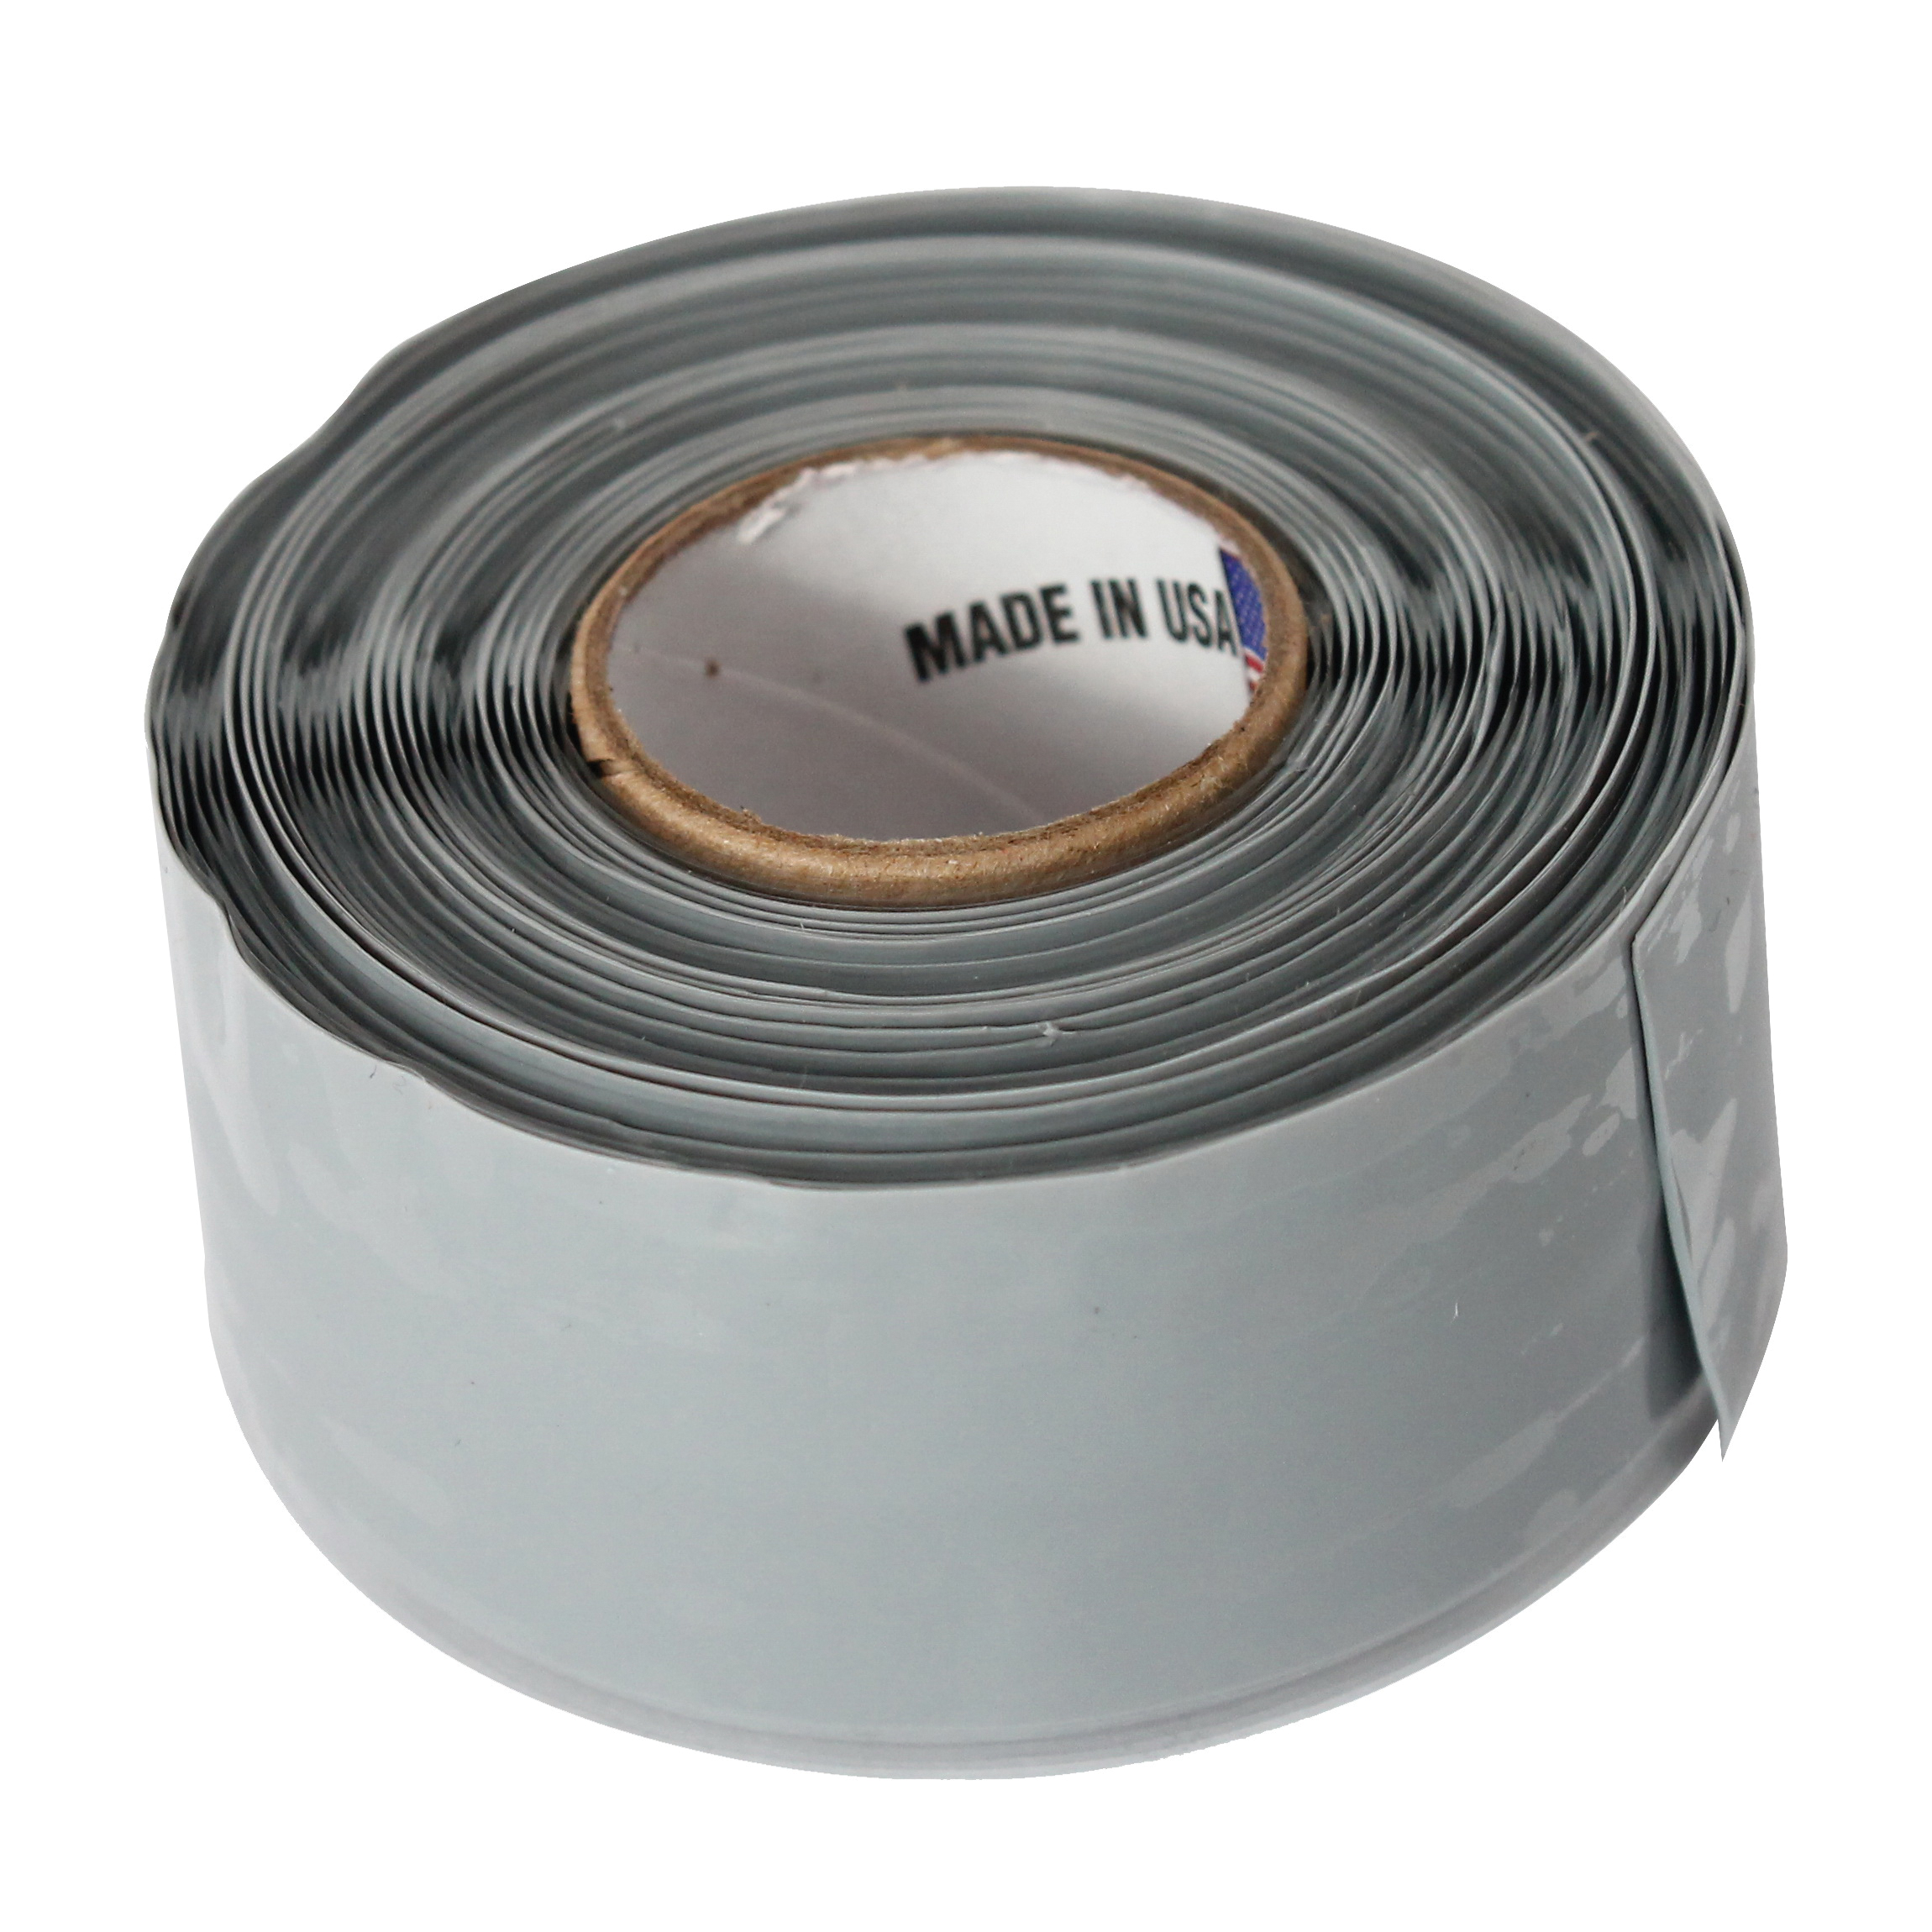 K855-3 Silicone Tape, 14 ft L, 1 in W, Gray